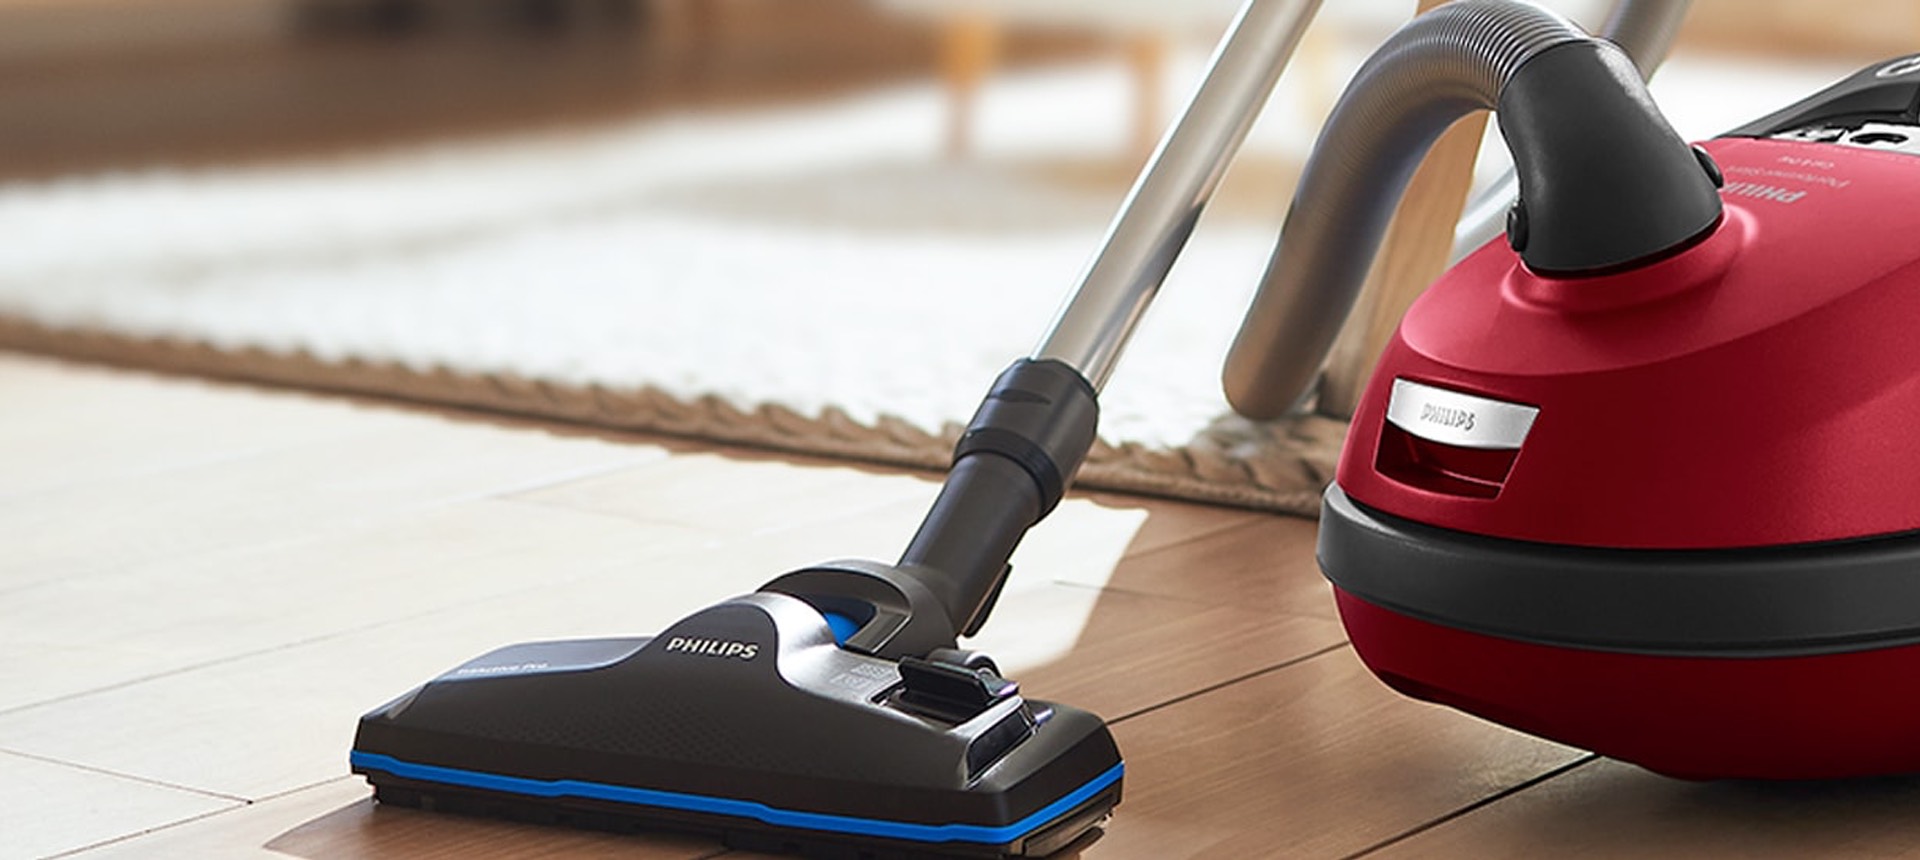 Cleaner Store, Top Cleaner On Best Vacuum Cleaner for Your Home